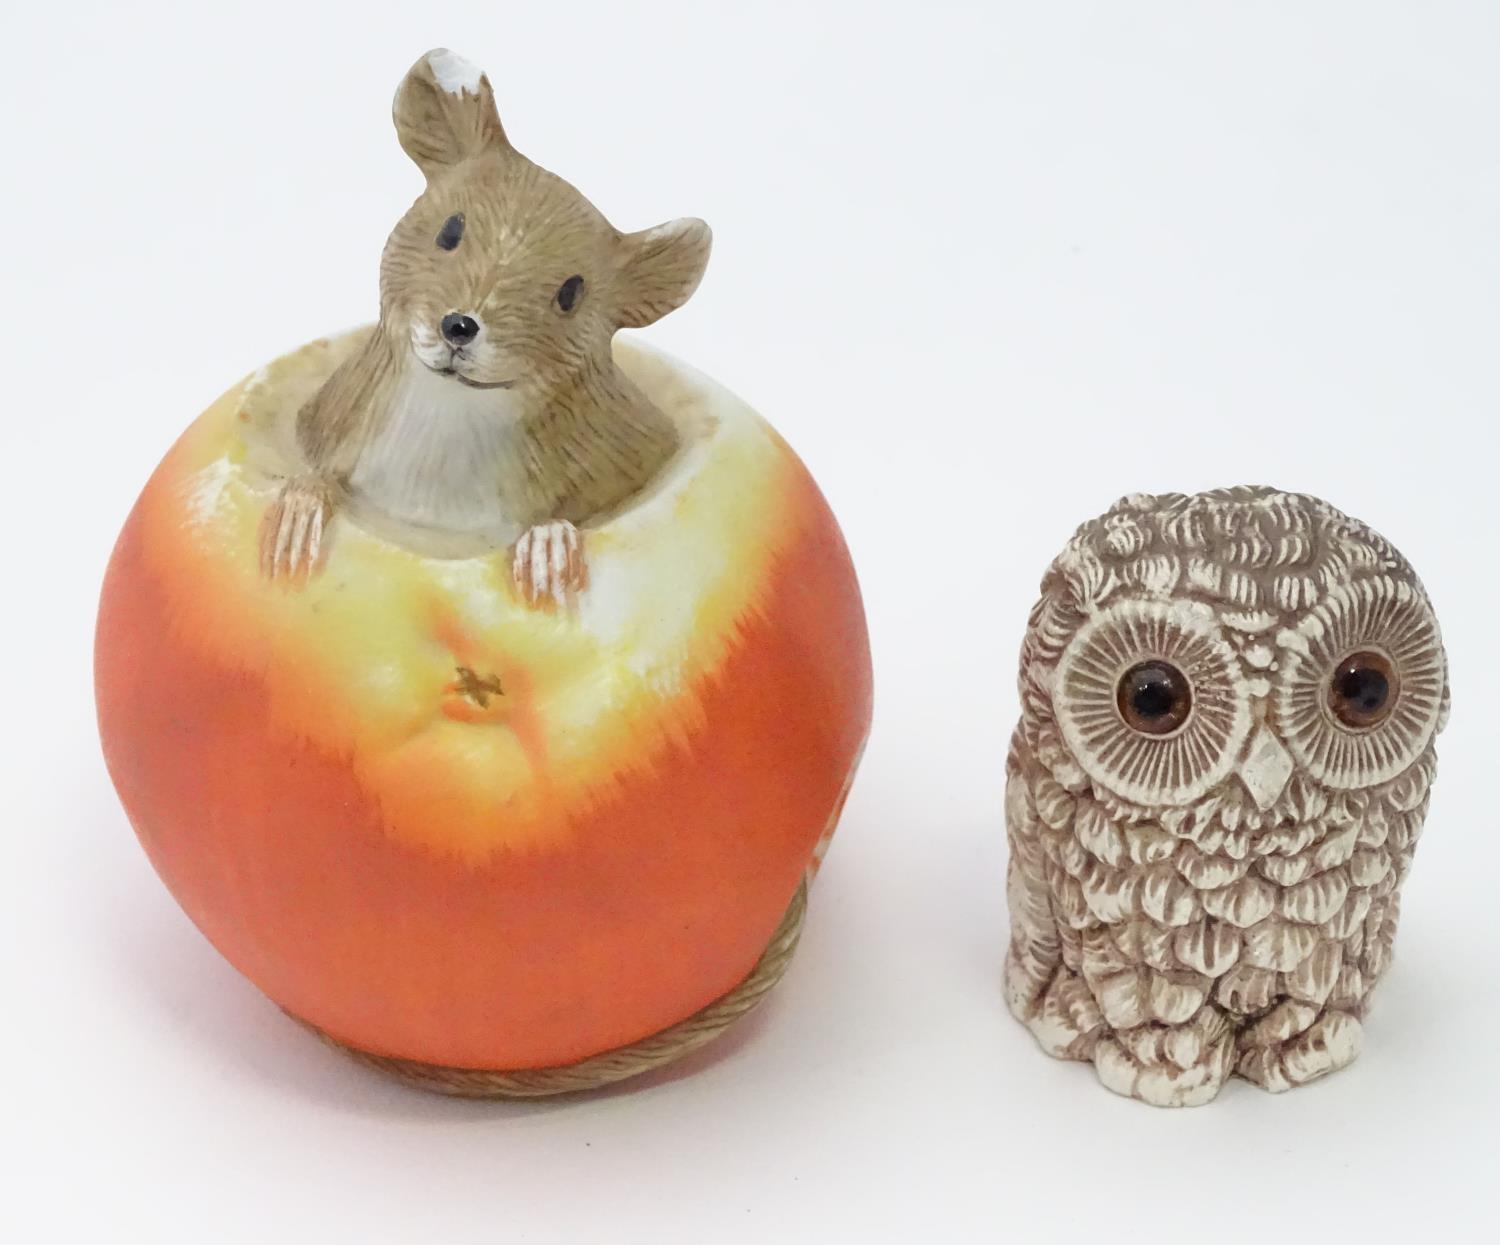 Ornament of a mouse in an apple together with a model of an ow (2) Please Note - we do not make